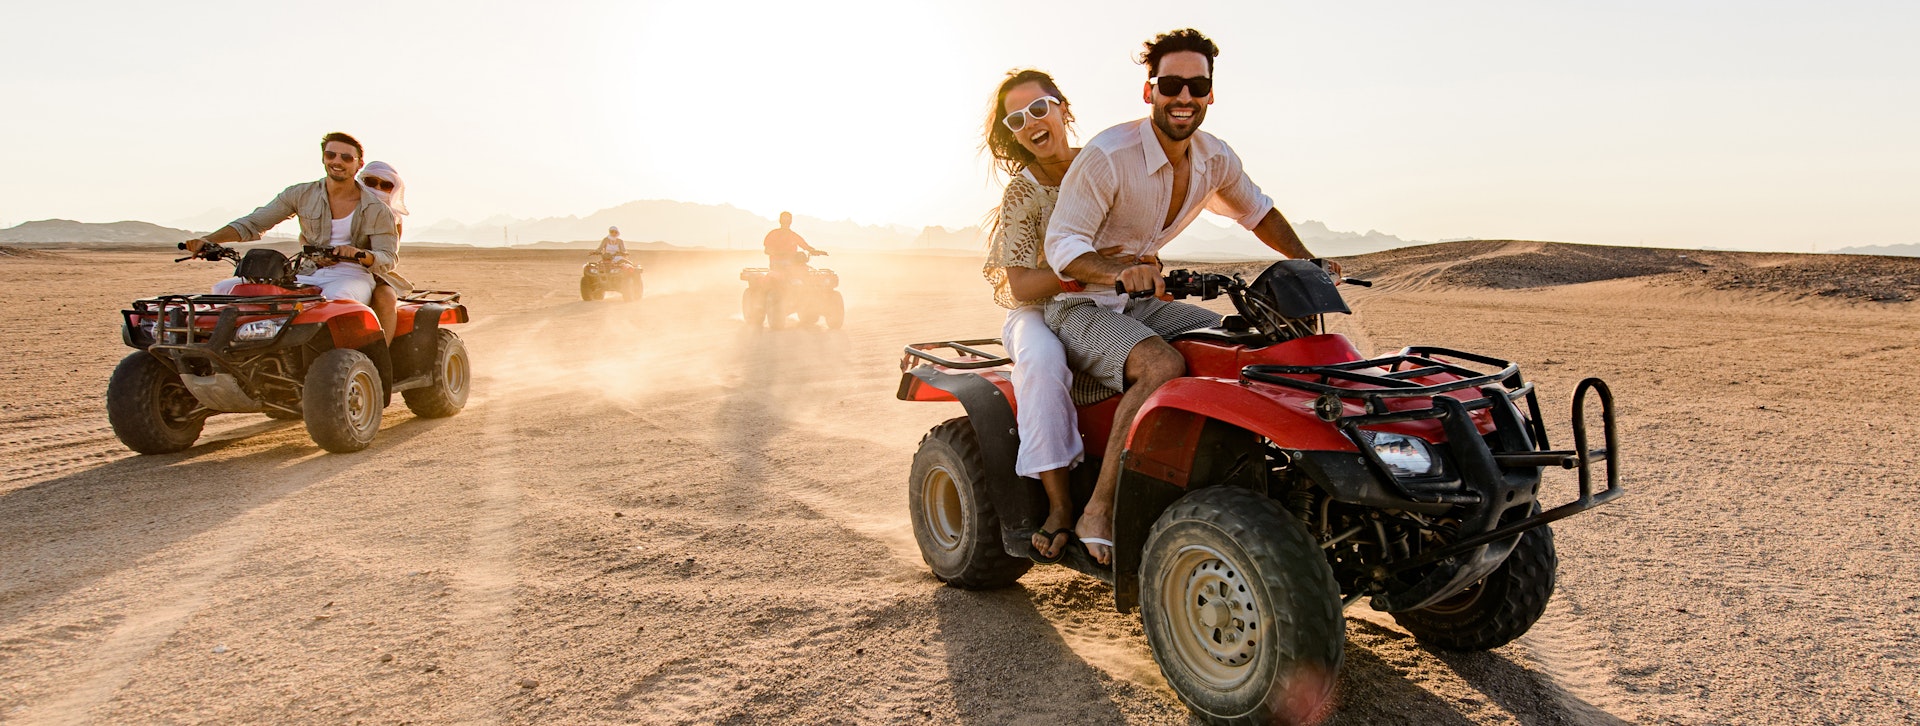 Happy friends driving quads in the desert at sunset.